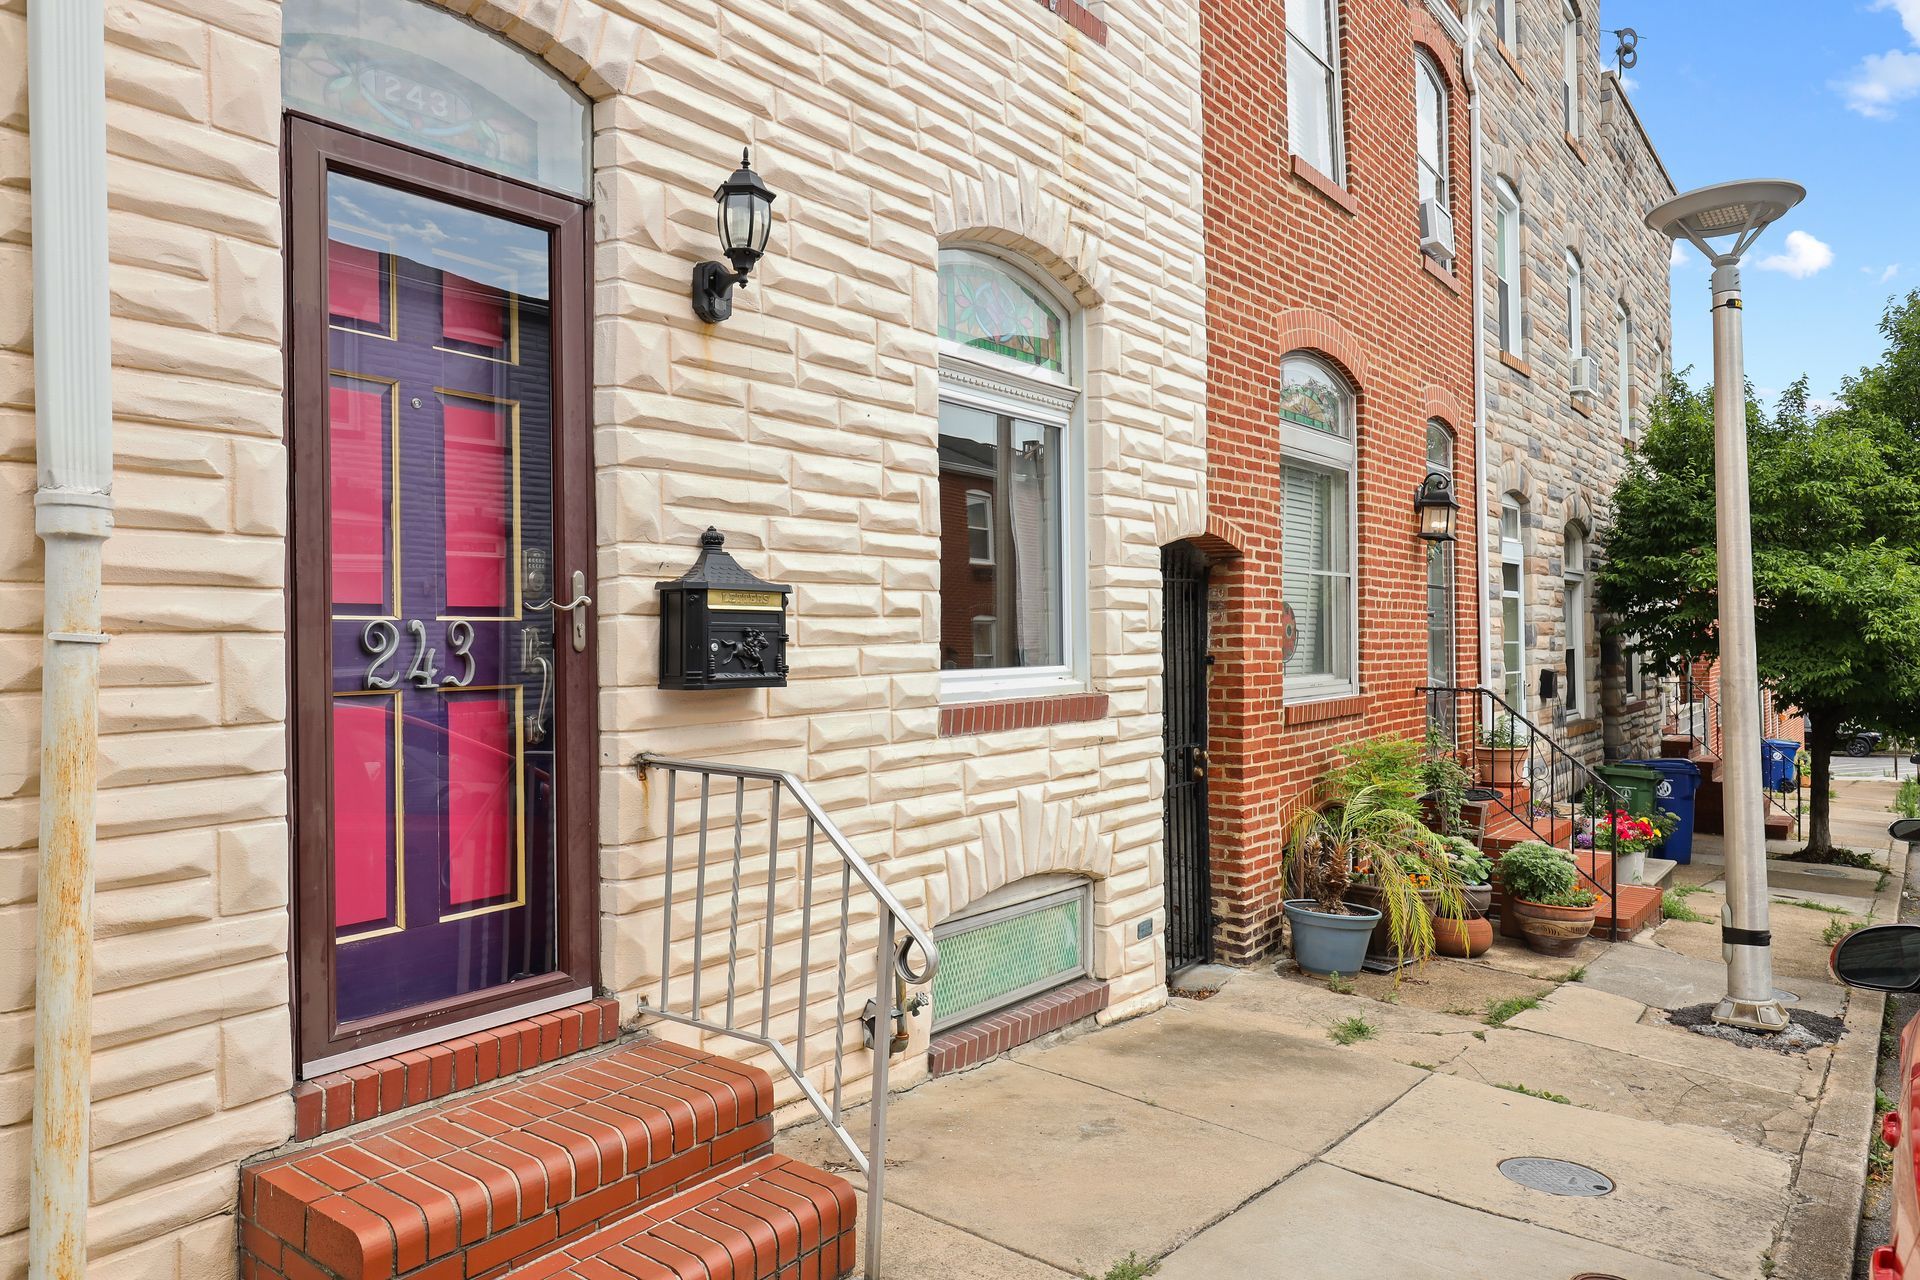 243 S. Castle St. Baltimore, MD - Street View